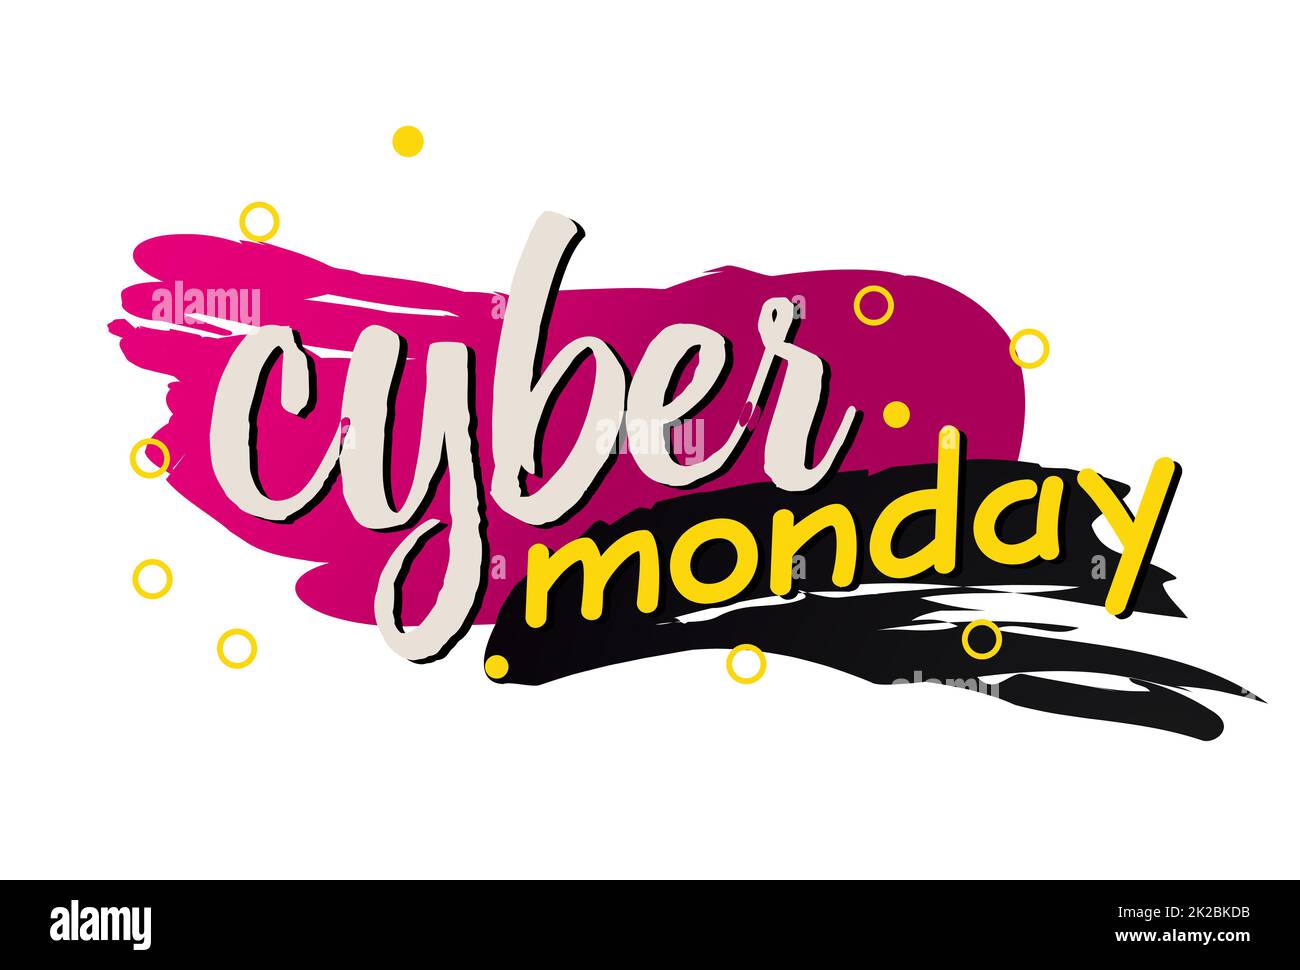 Abstract web banner, business card, template CYBER MONDAY - Vector Stock Photo